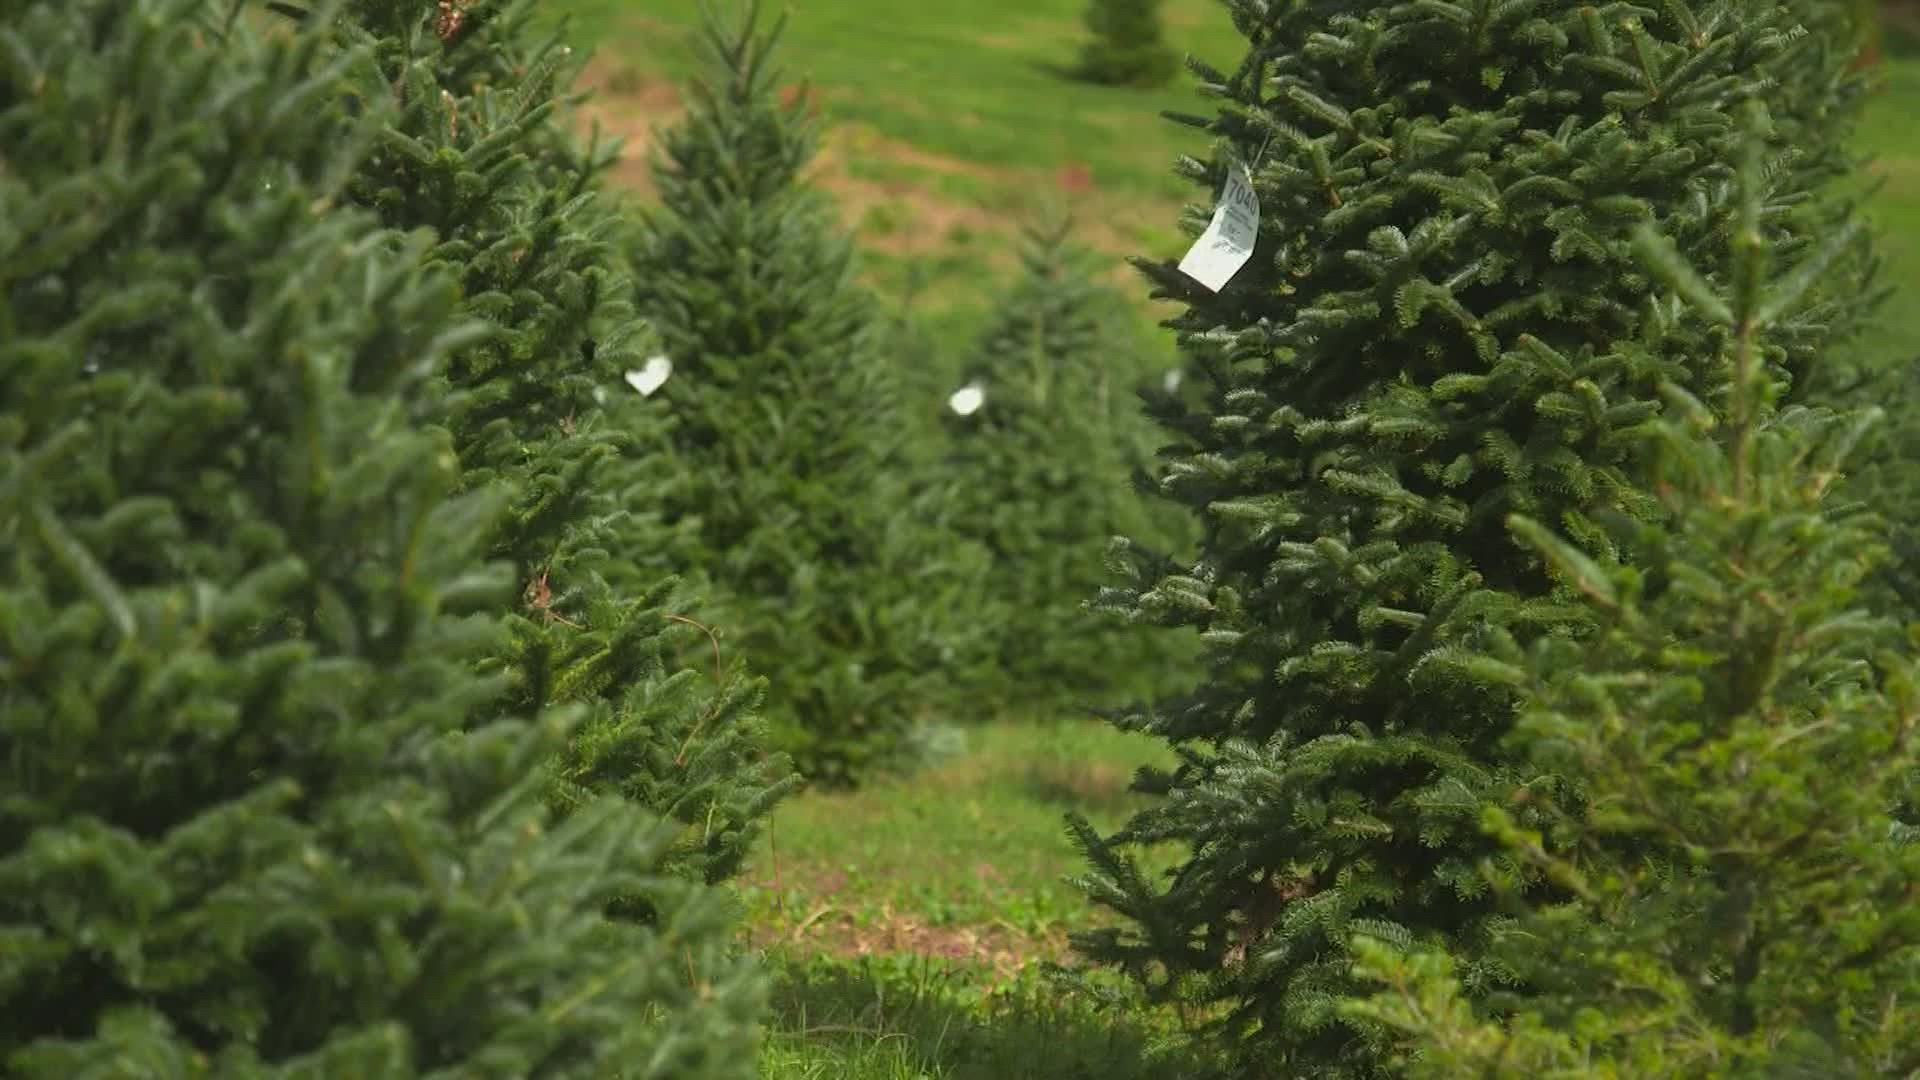 Prices are going up, farmers say, because tree farm operating costs have also risen over the last year.